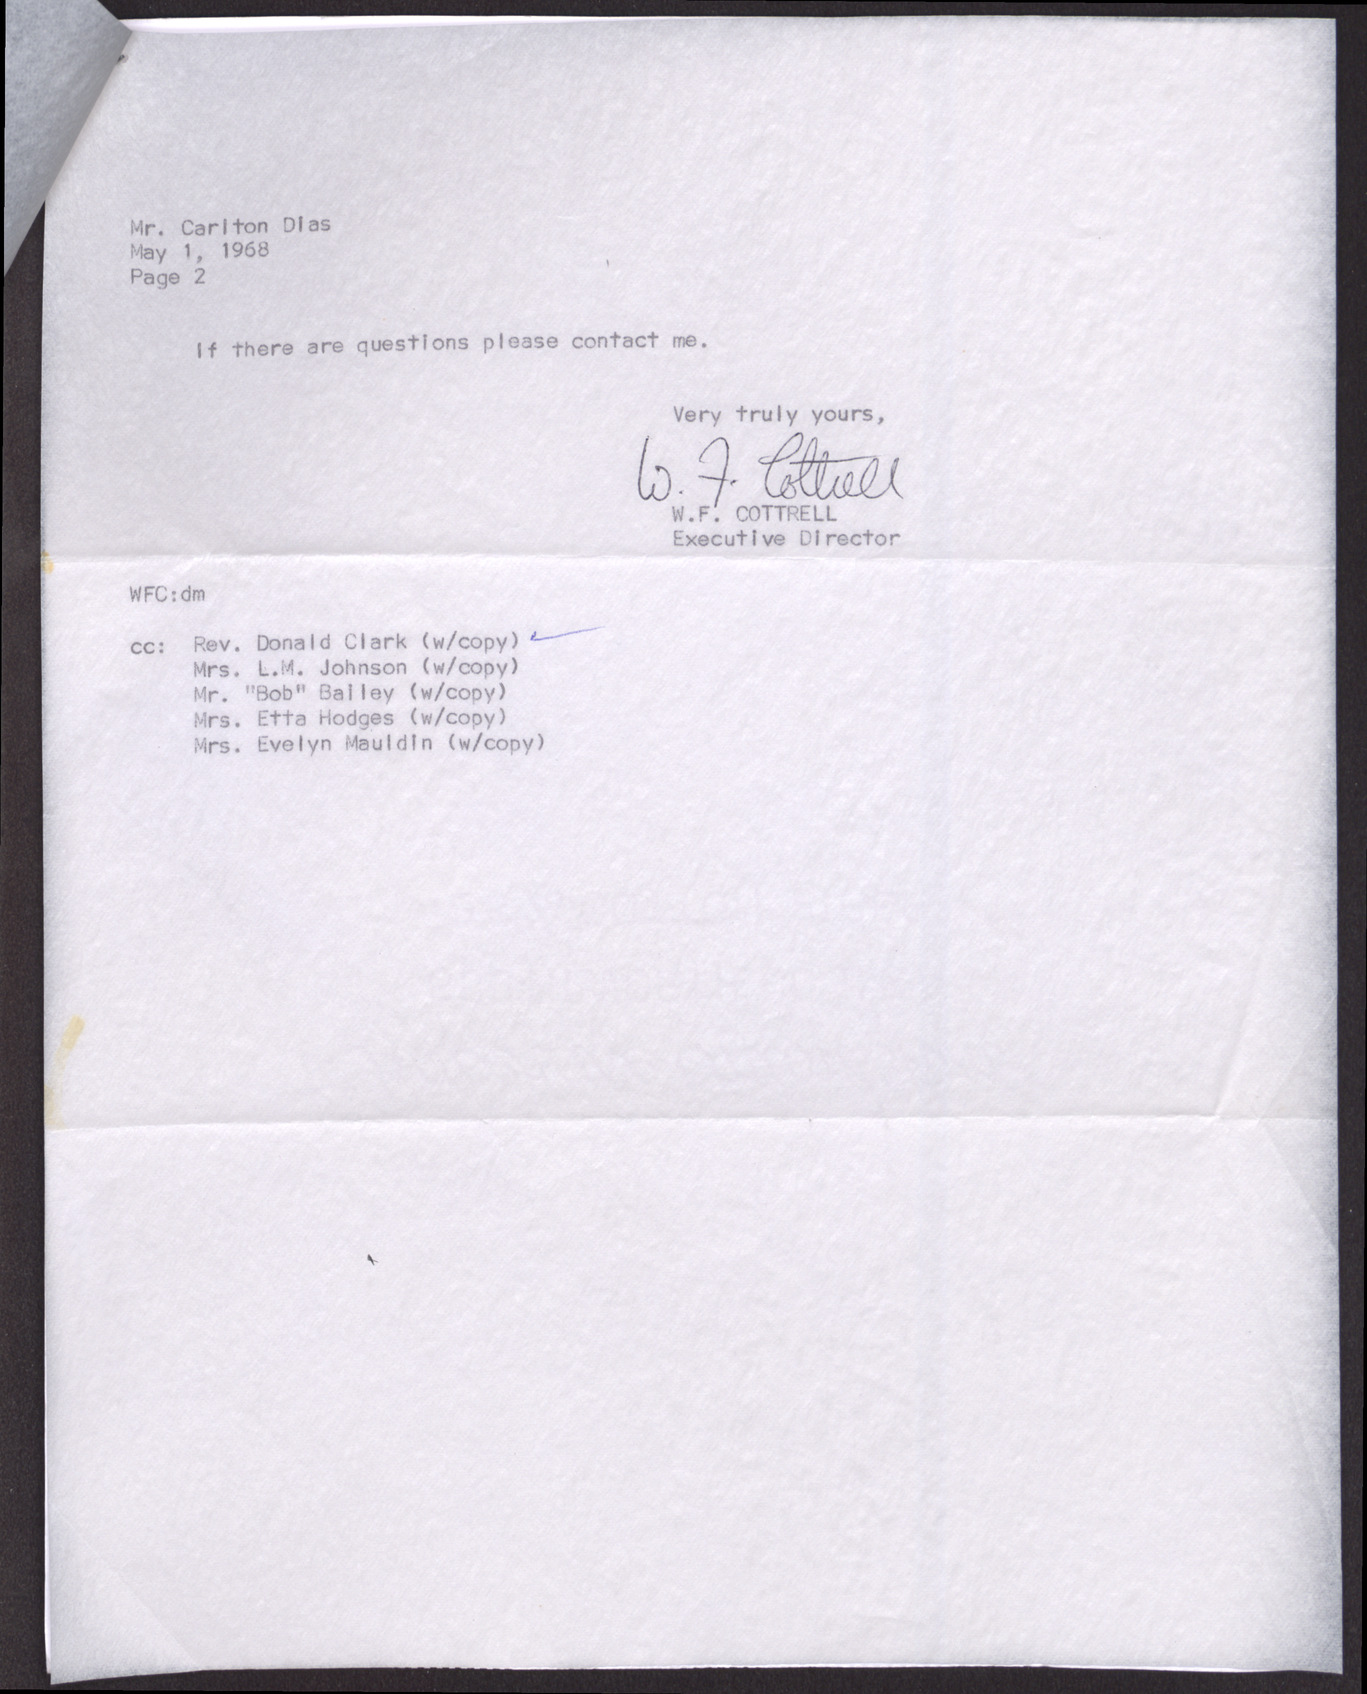 Letter to Mr. Carlton Dias from W. F. Cottrell (2 pages), May 1, 1968, page 2